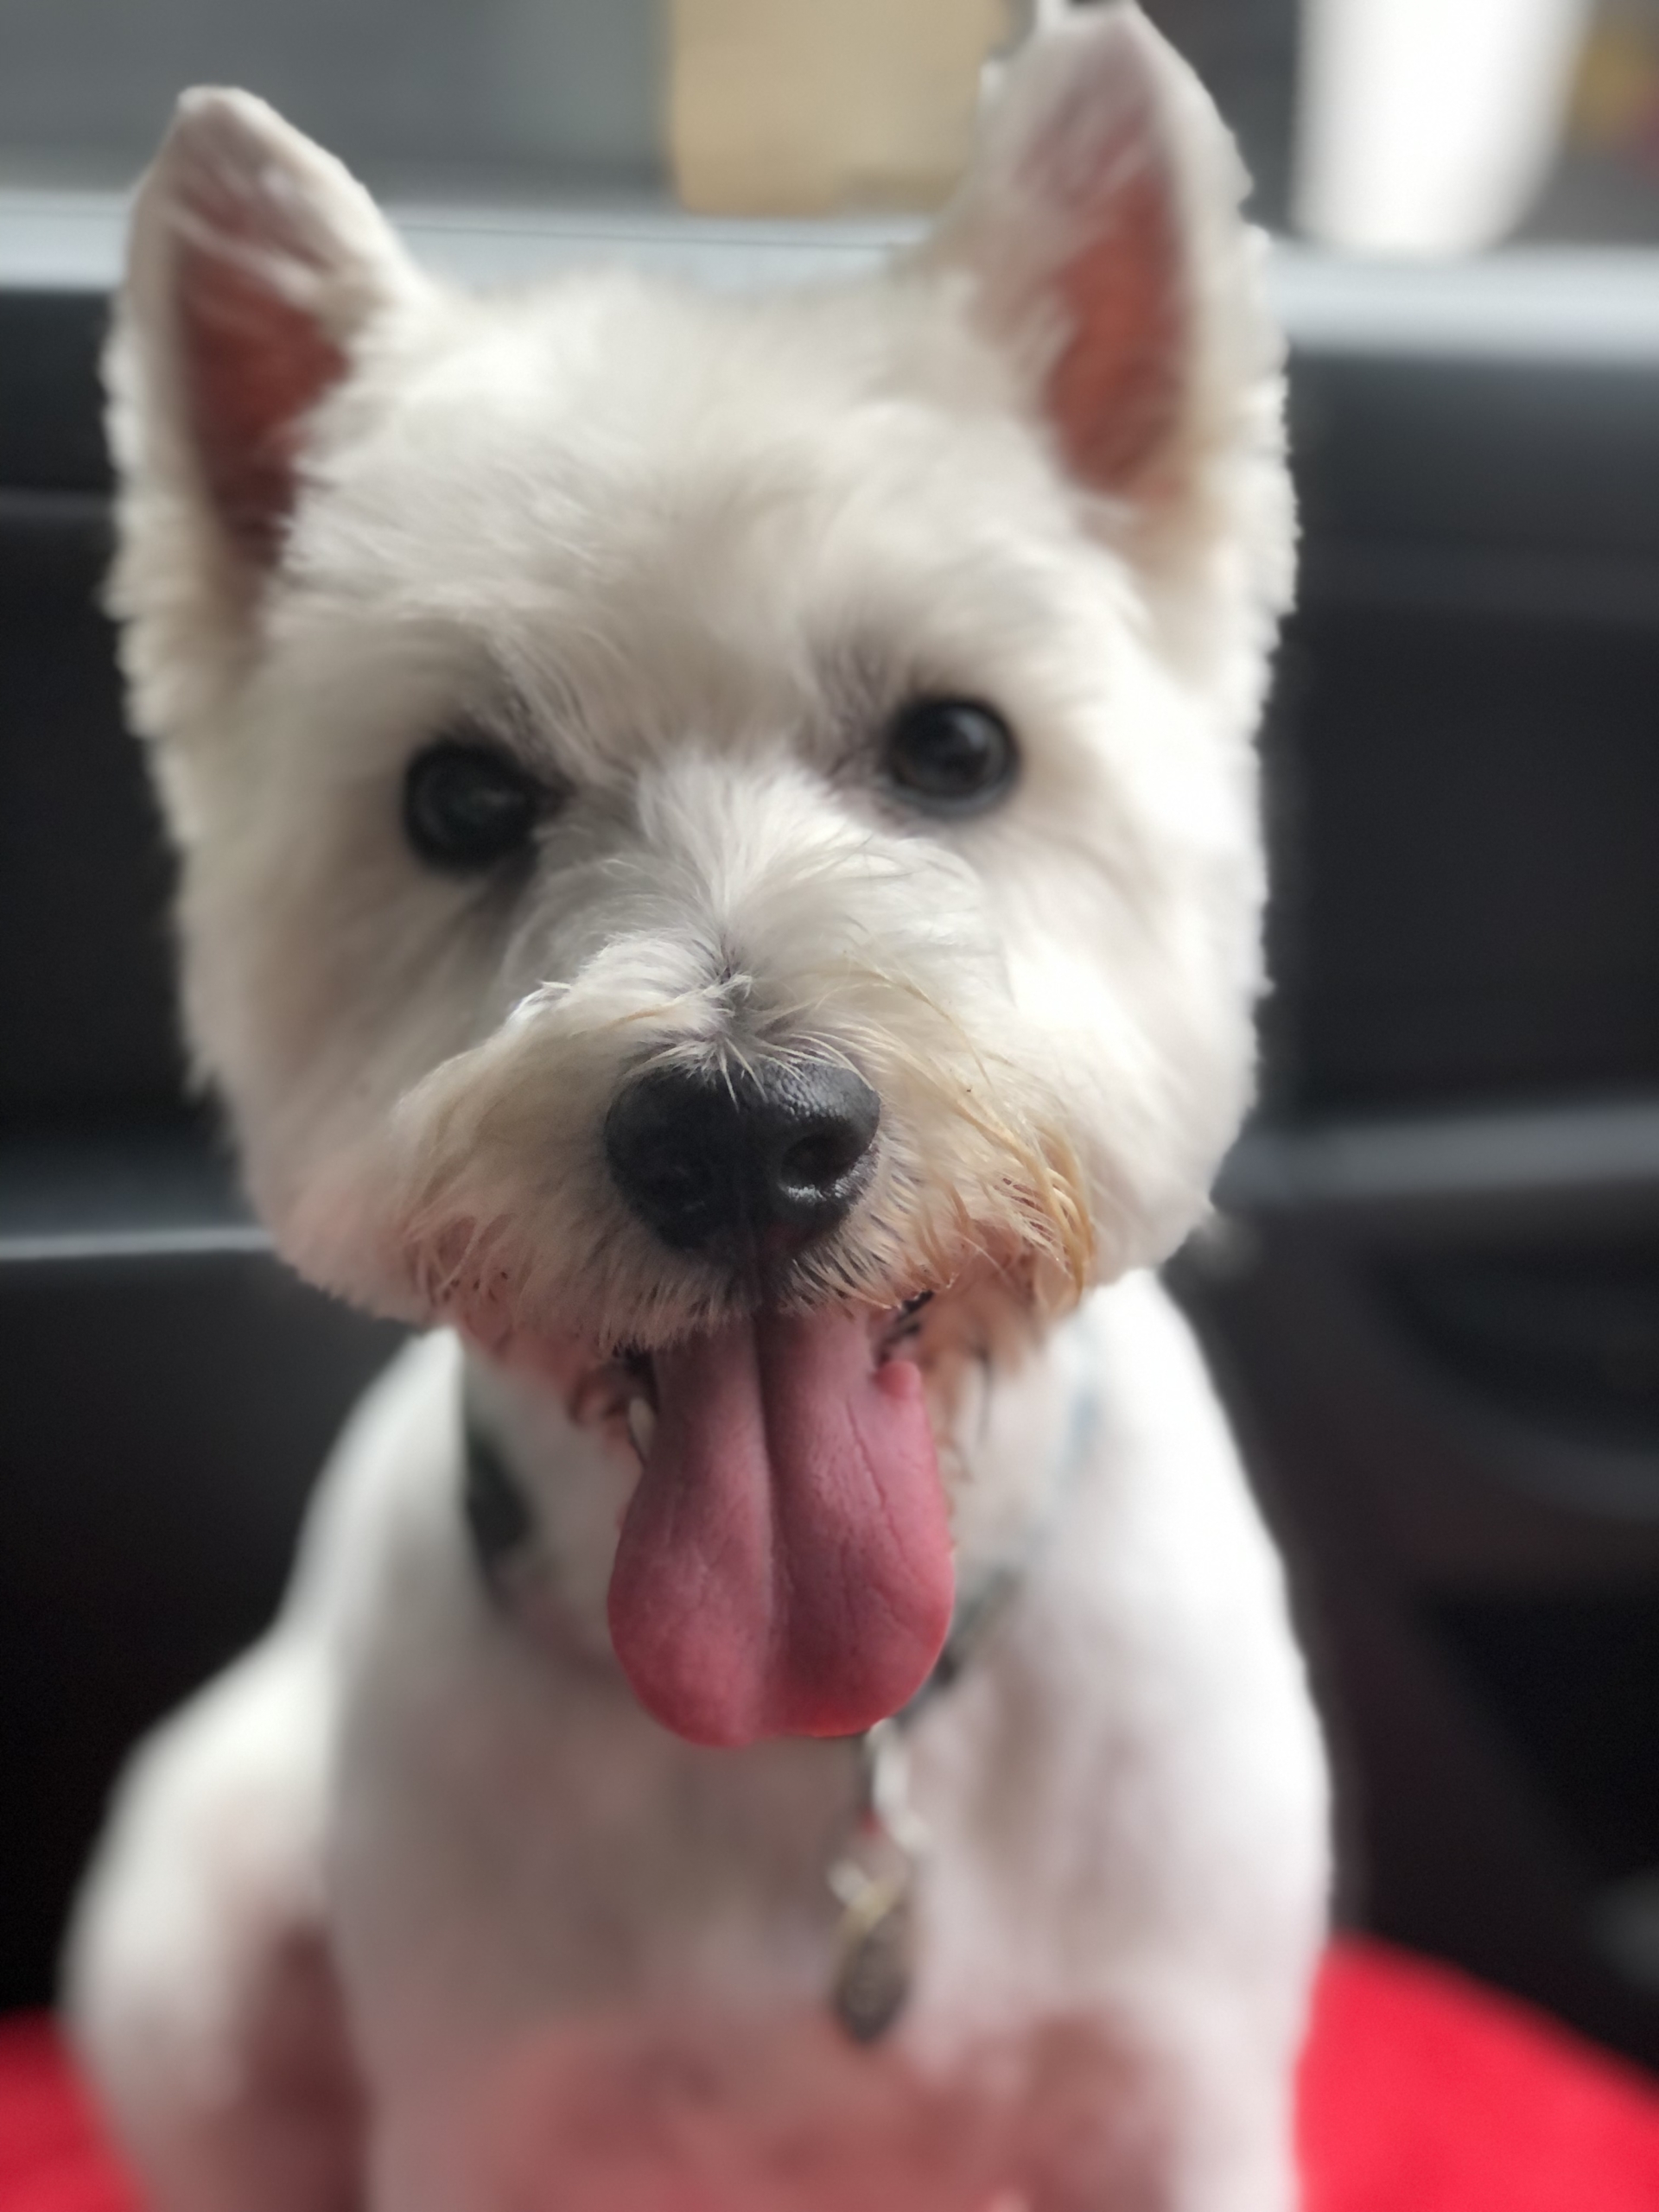 Westie, with pink tongue, Lulu the Westie